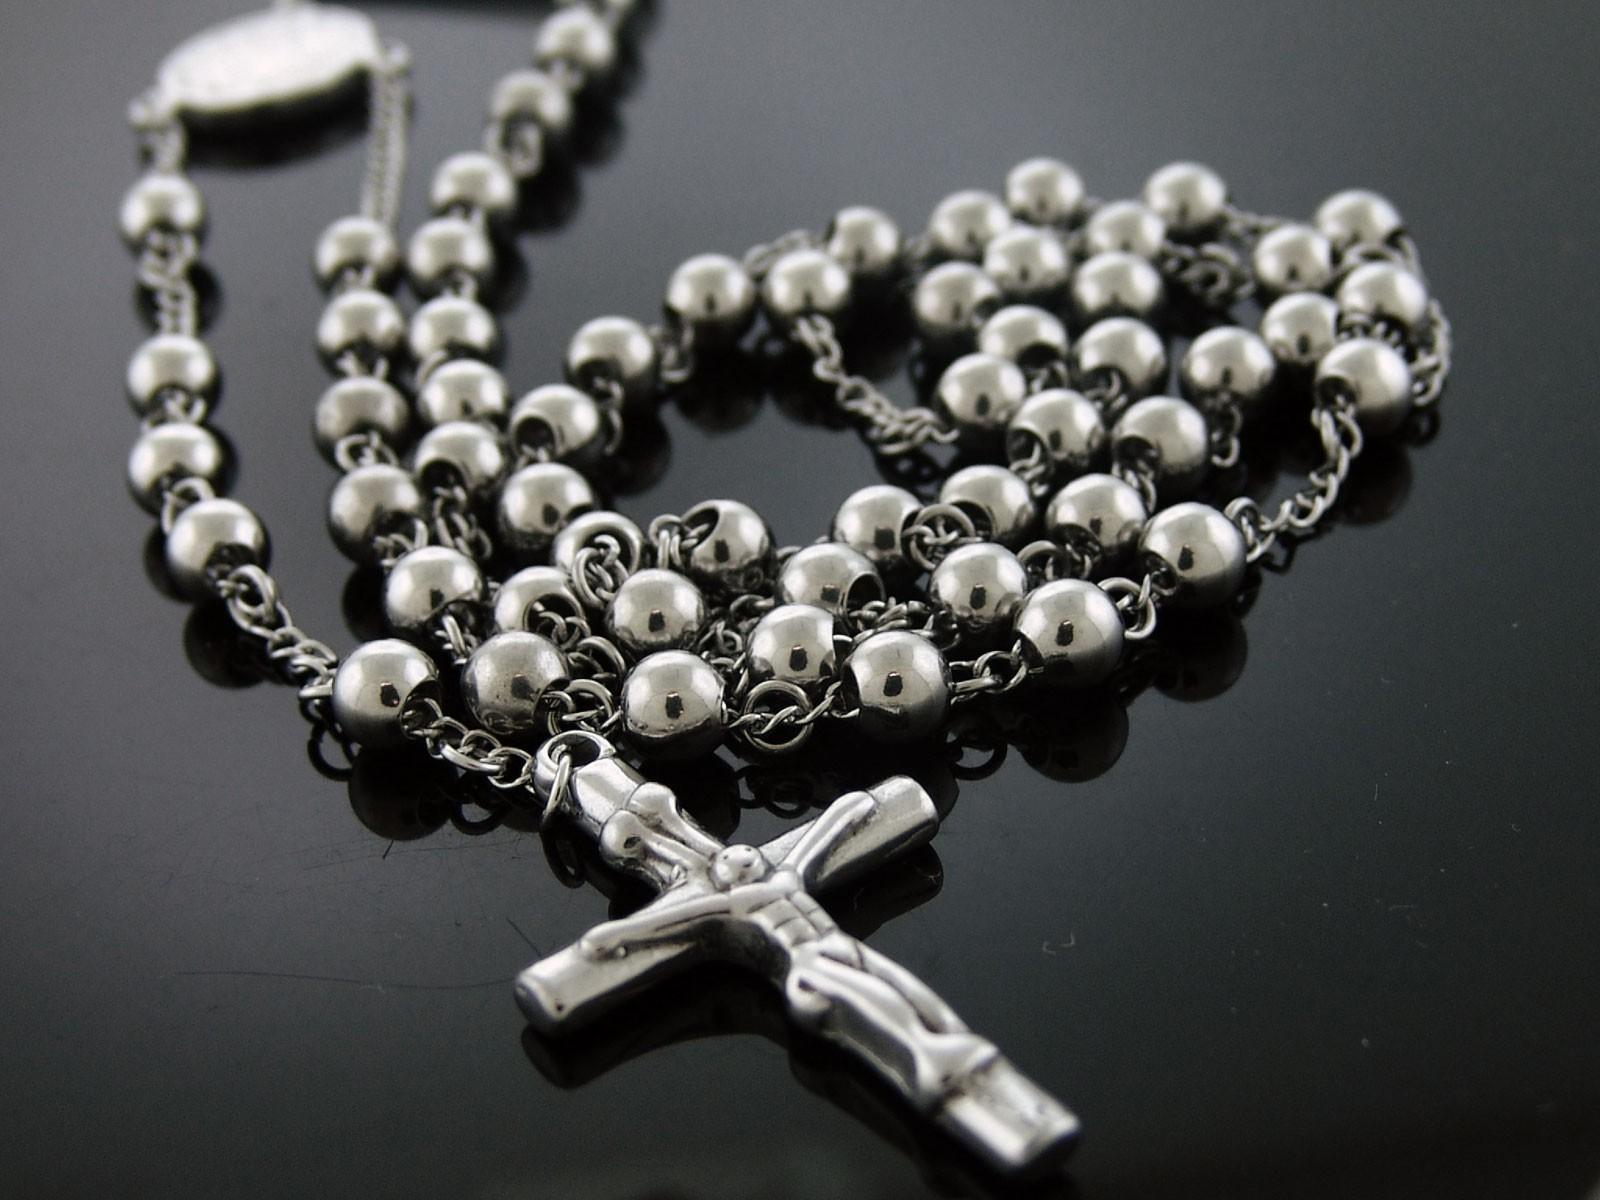 Gallery For Gt Catholic Rosary Wallpaper